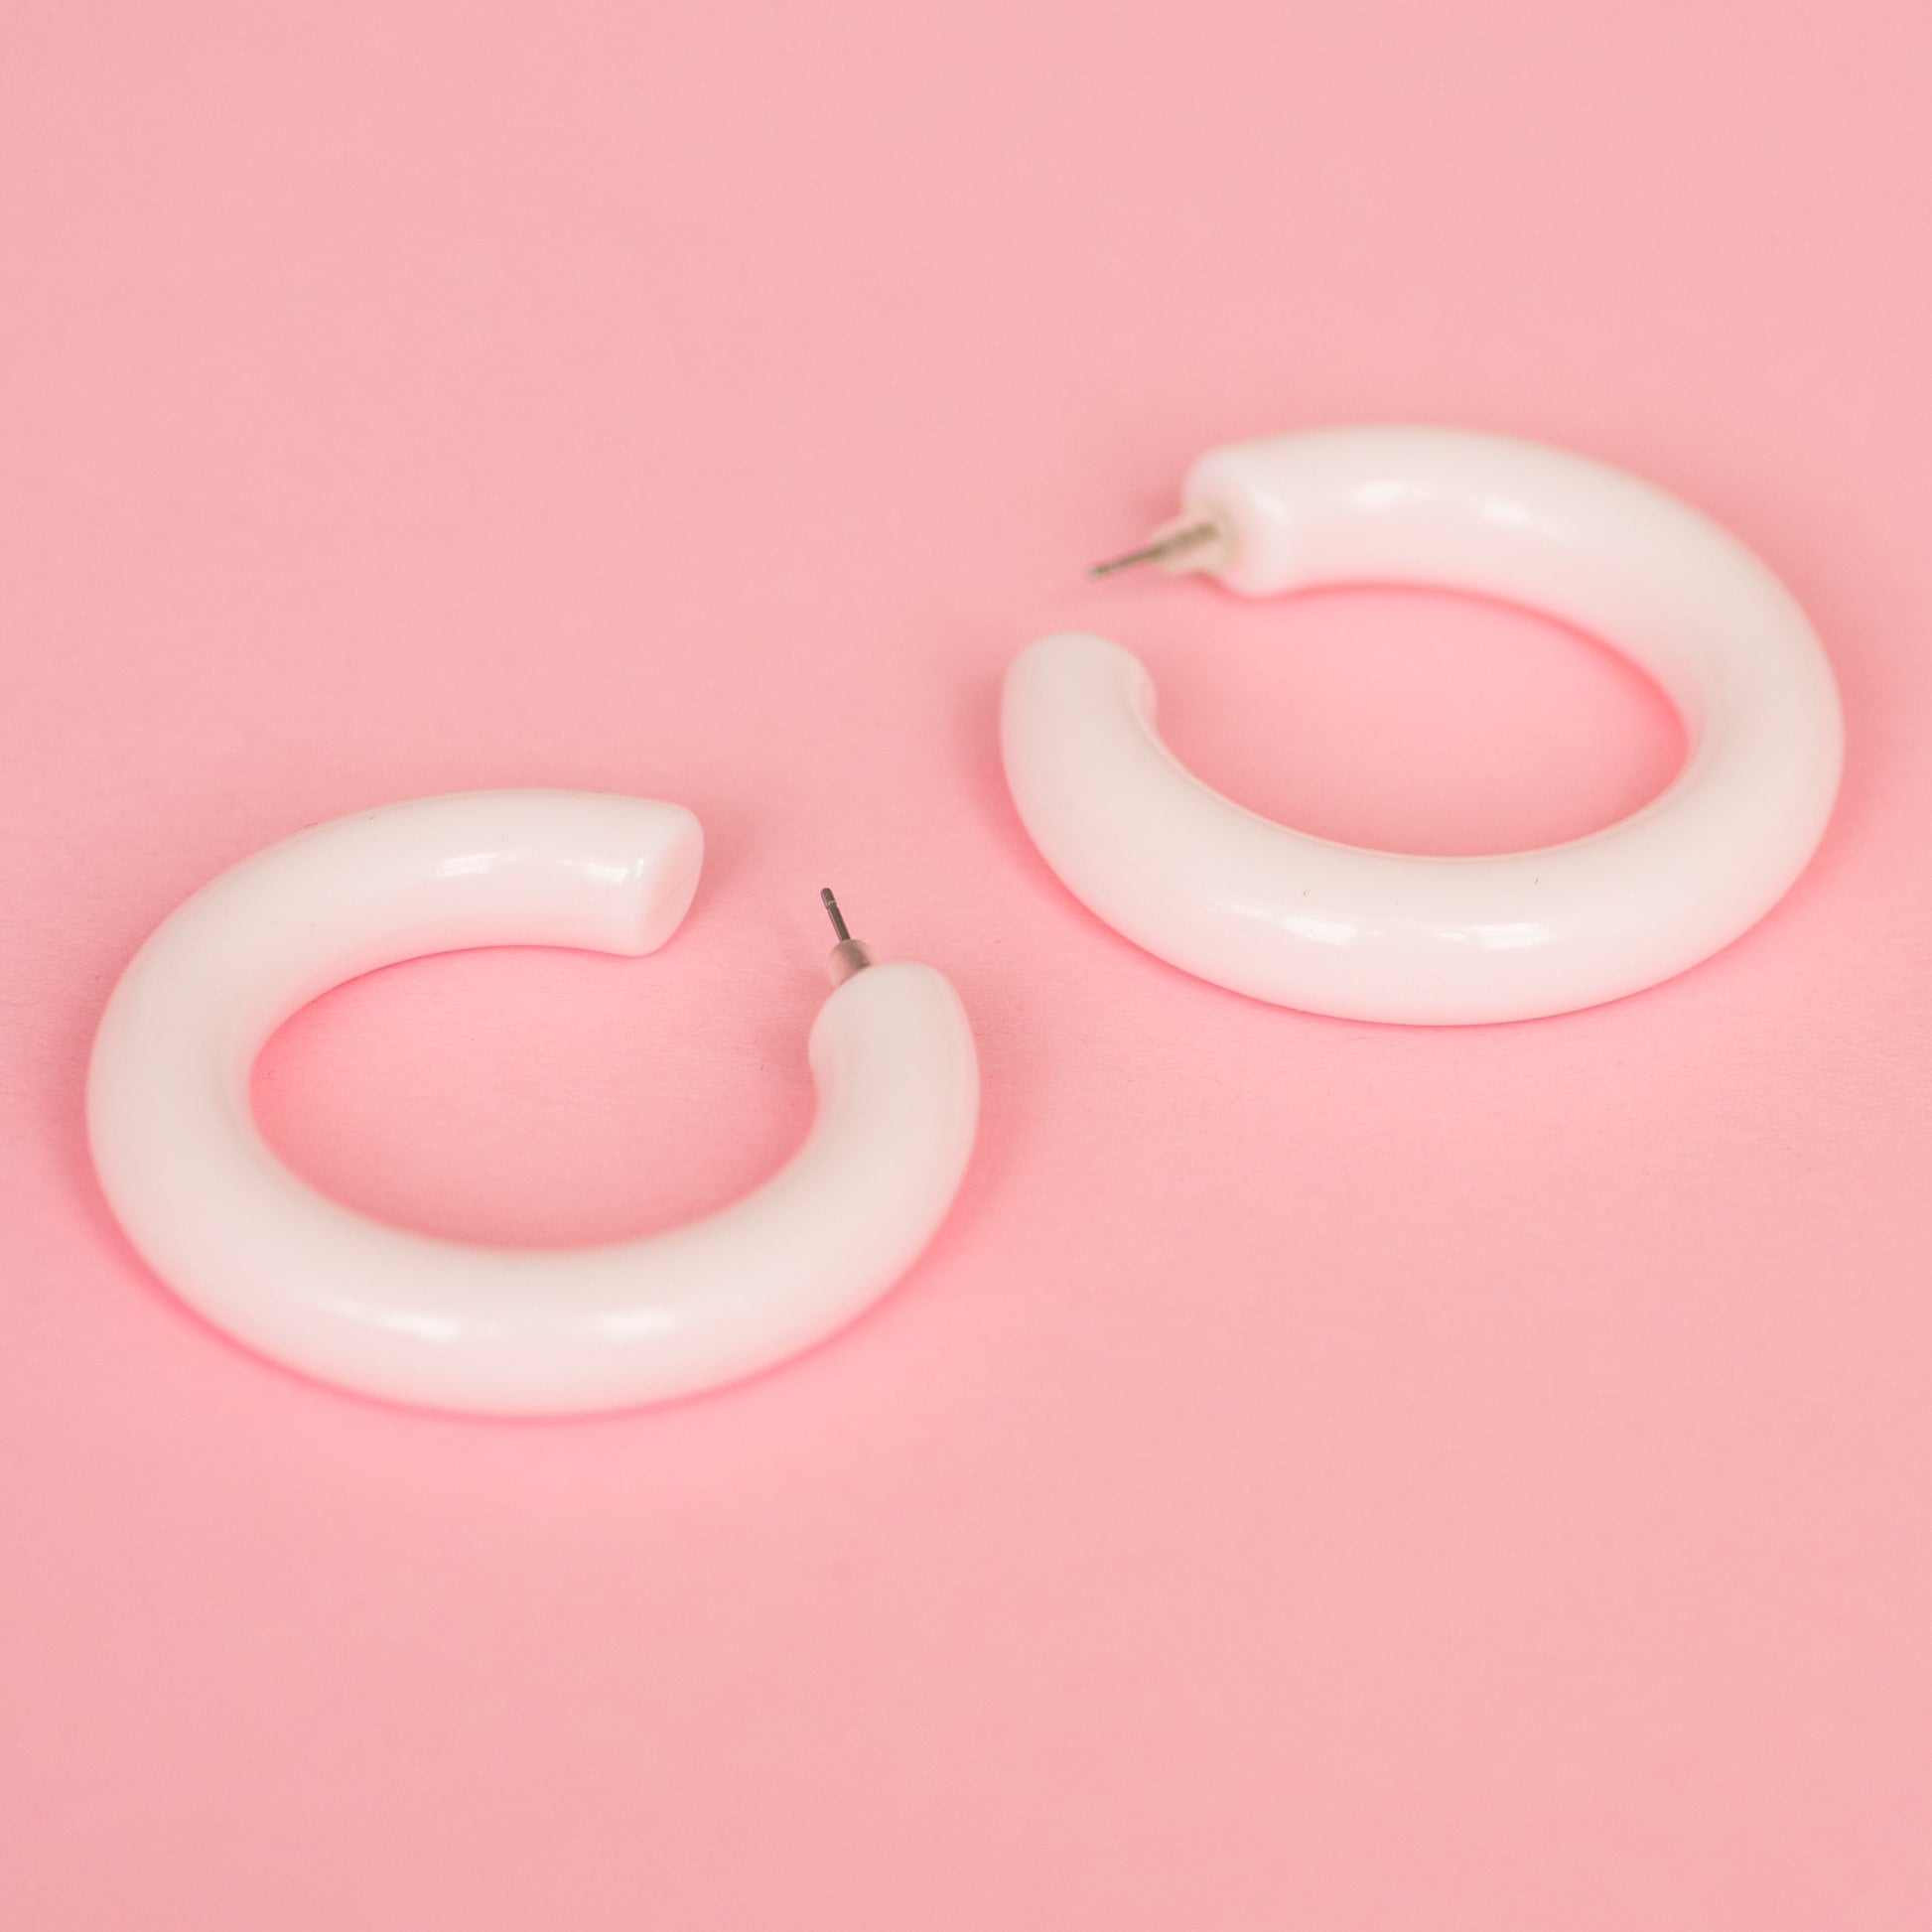 Soft Blush Chunky Hoop Earrings - Closed Caption | Shop Vintage + Handmade. Always Sustainable. Never Wasteful.